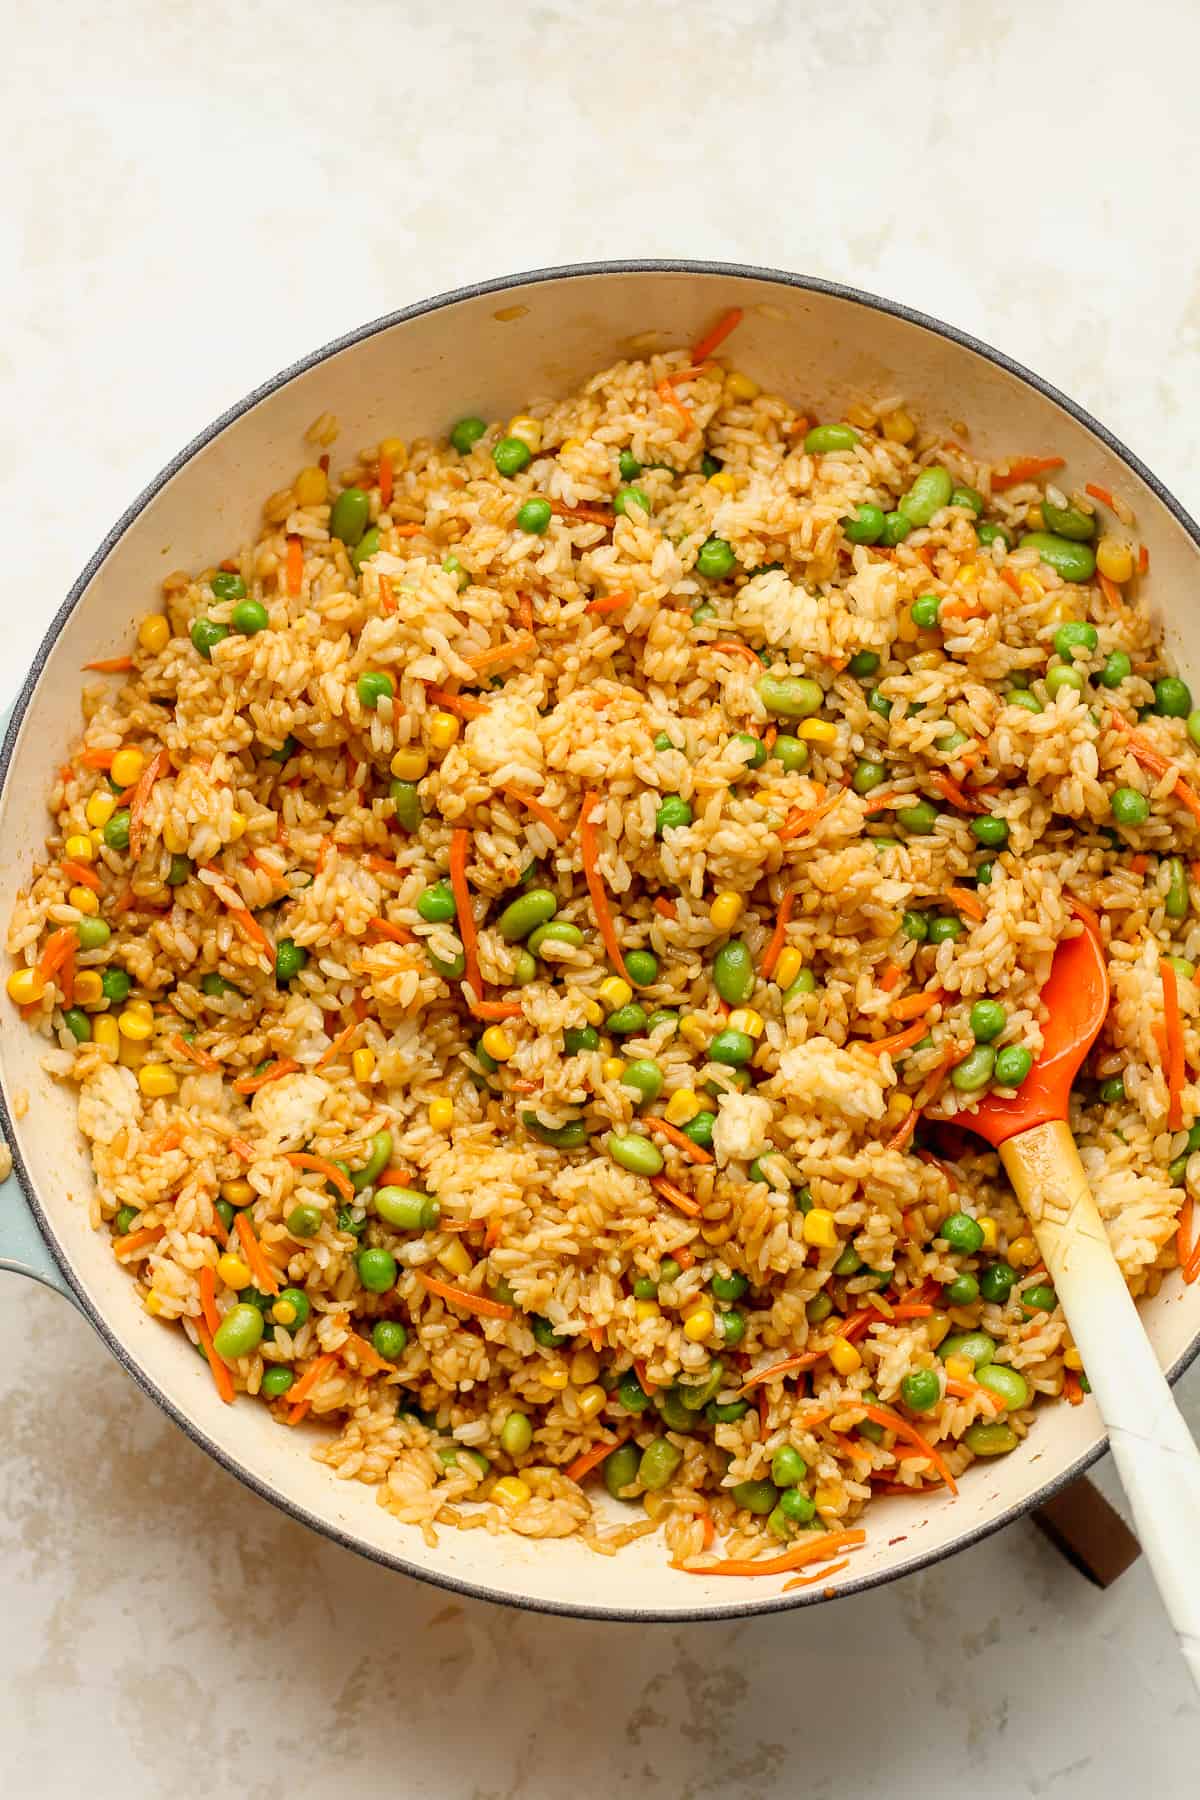 A po top the fried rice.